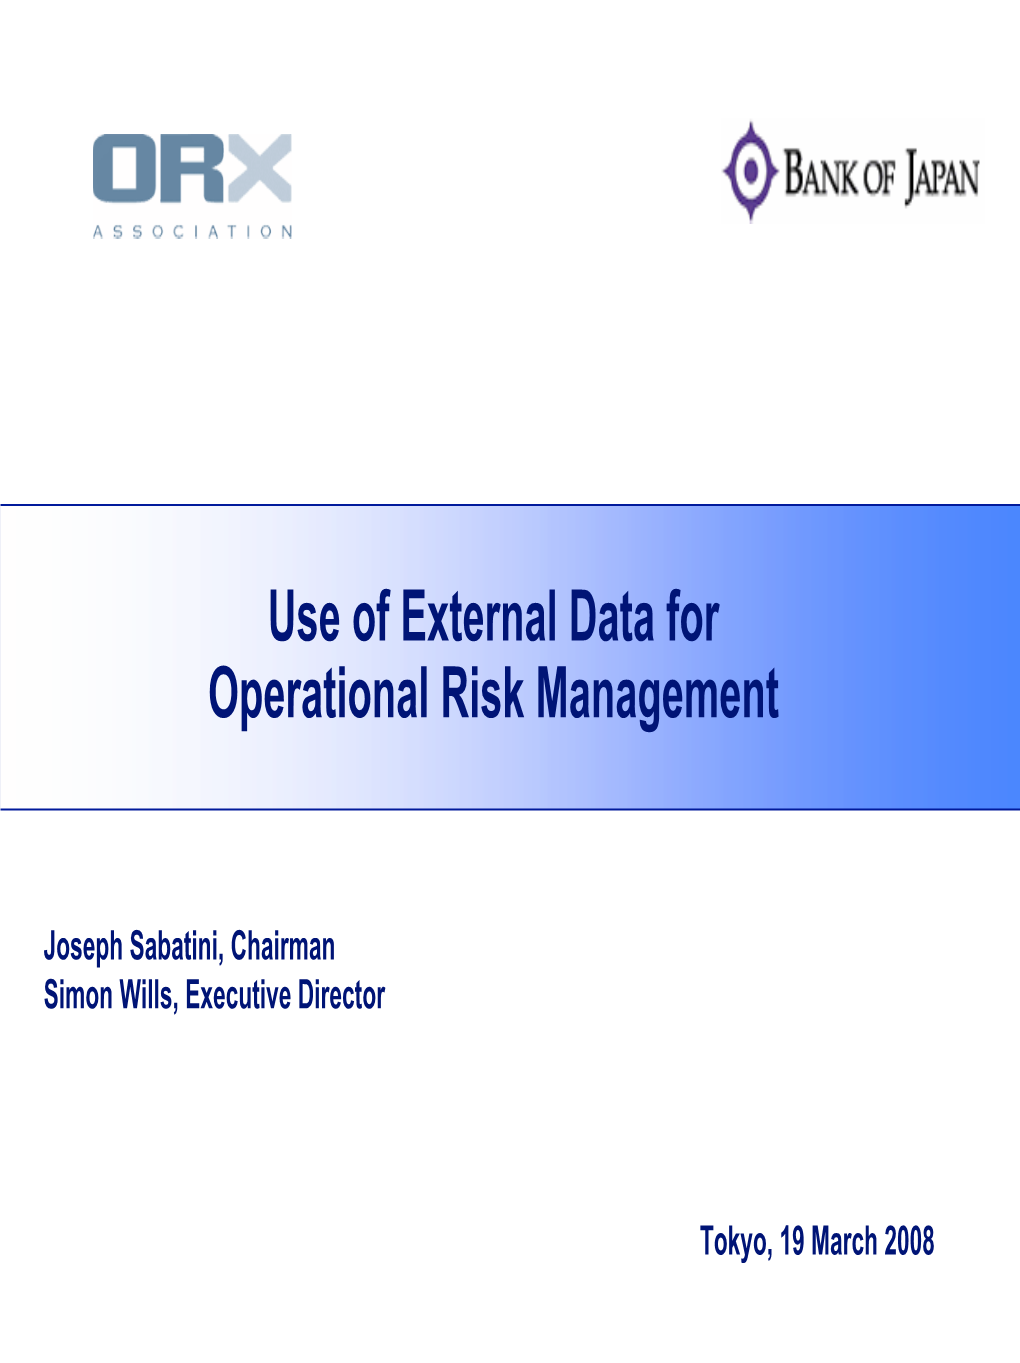 Use of External Data for Operational Risk Management